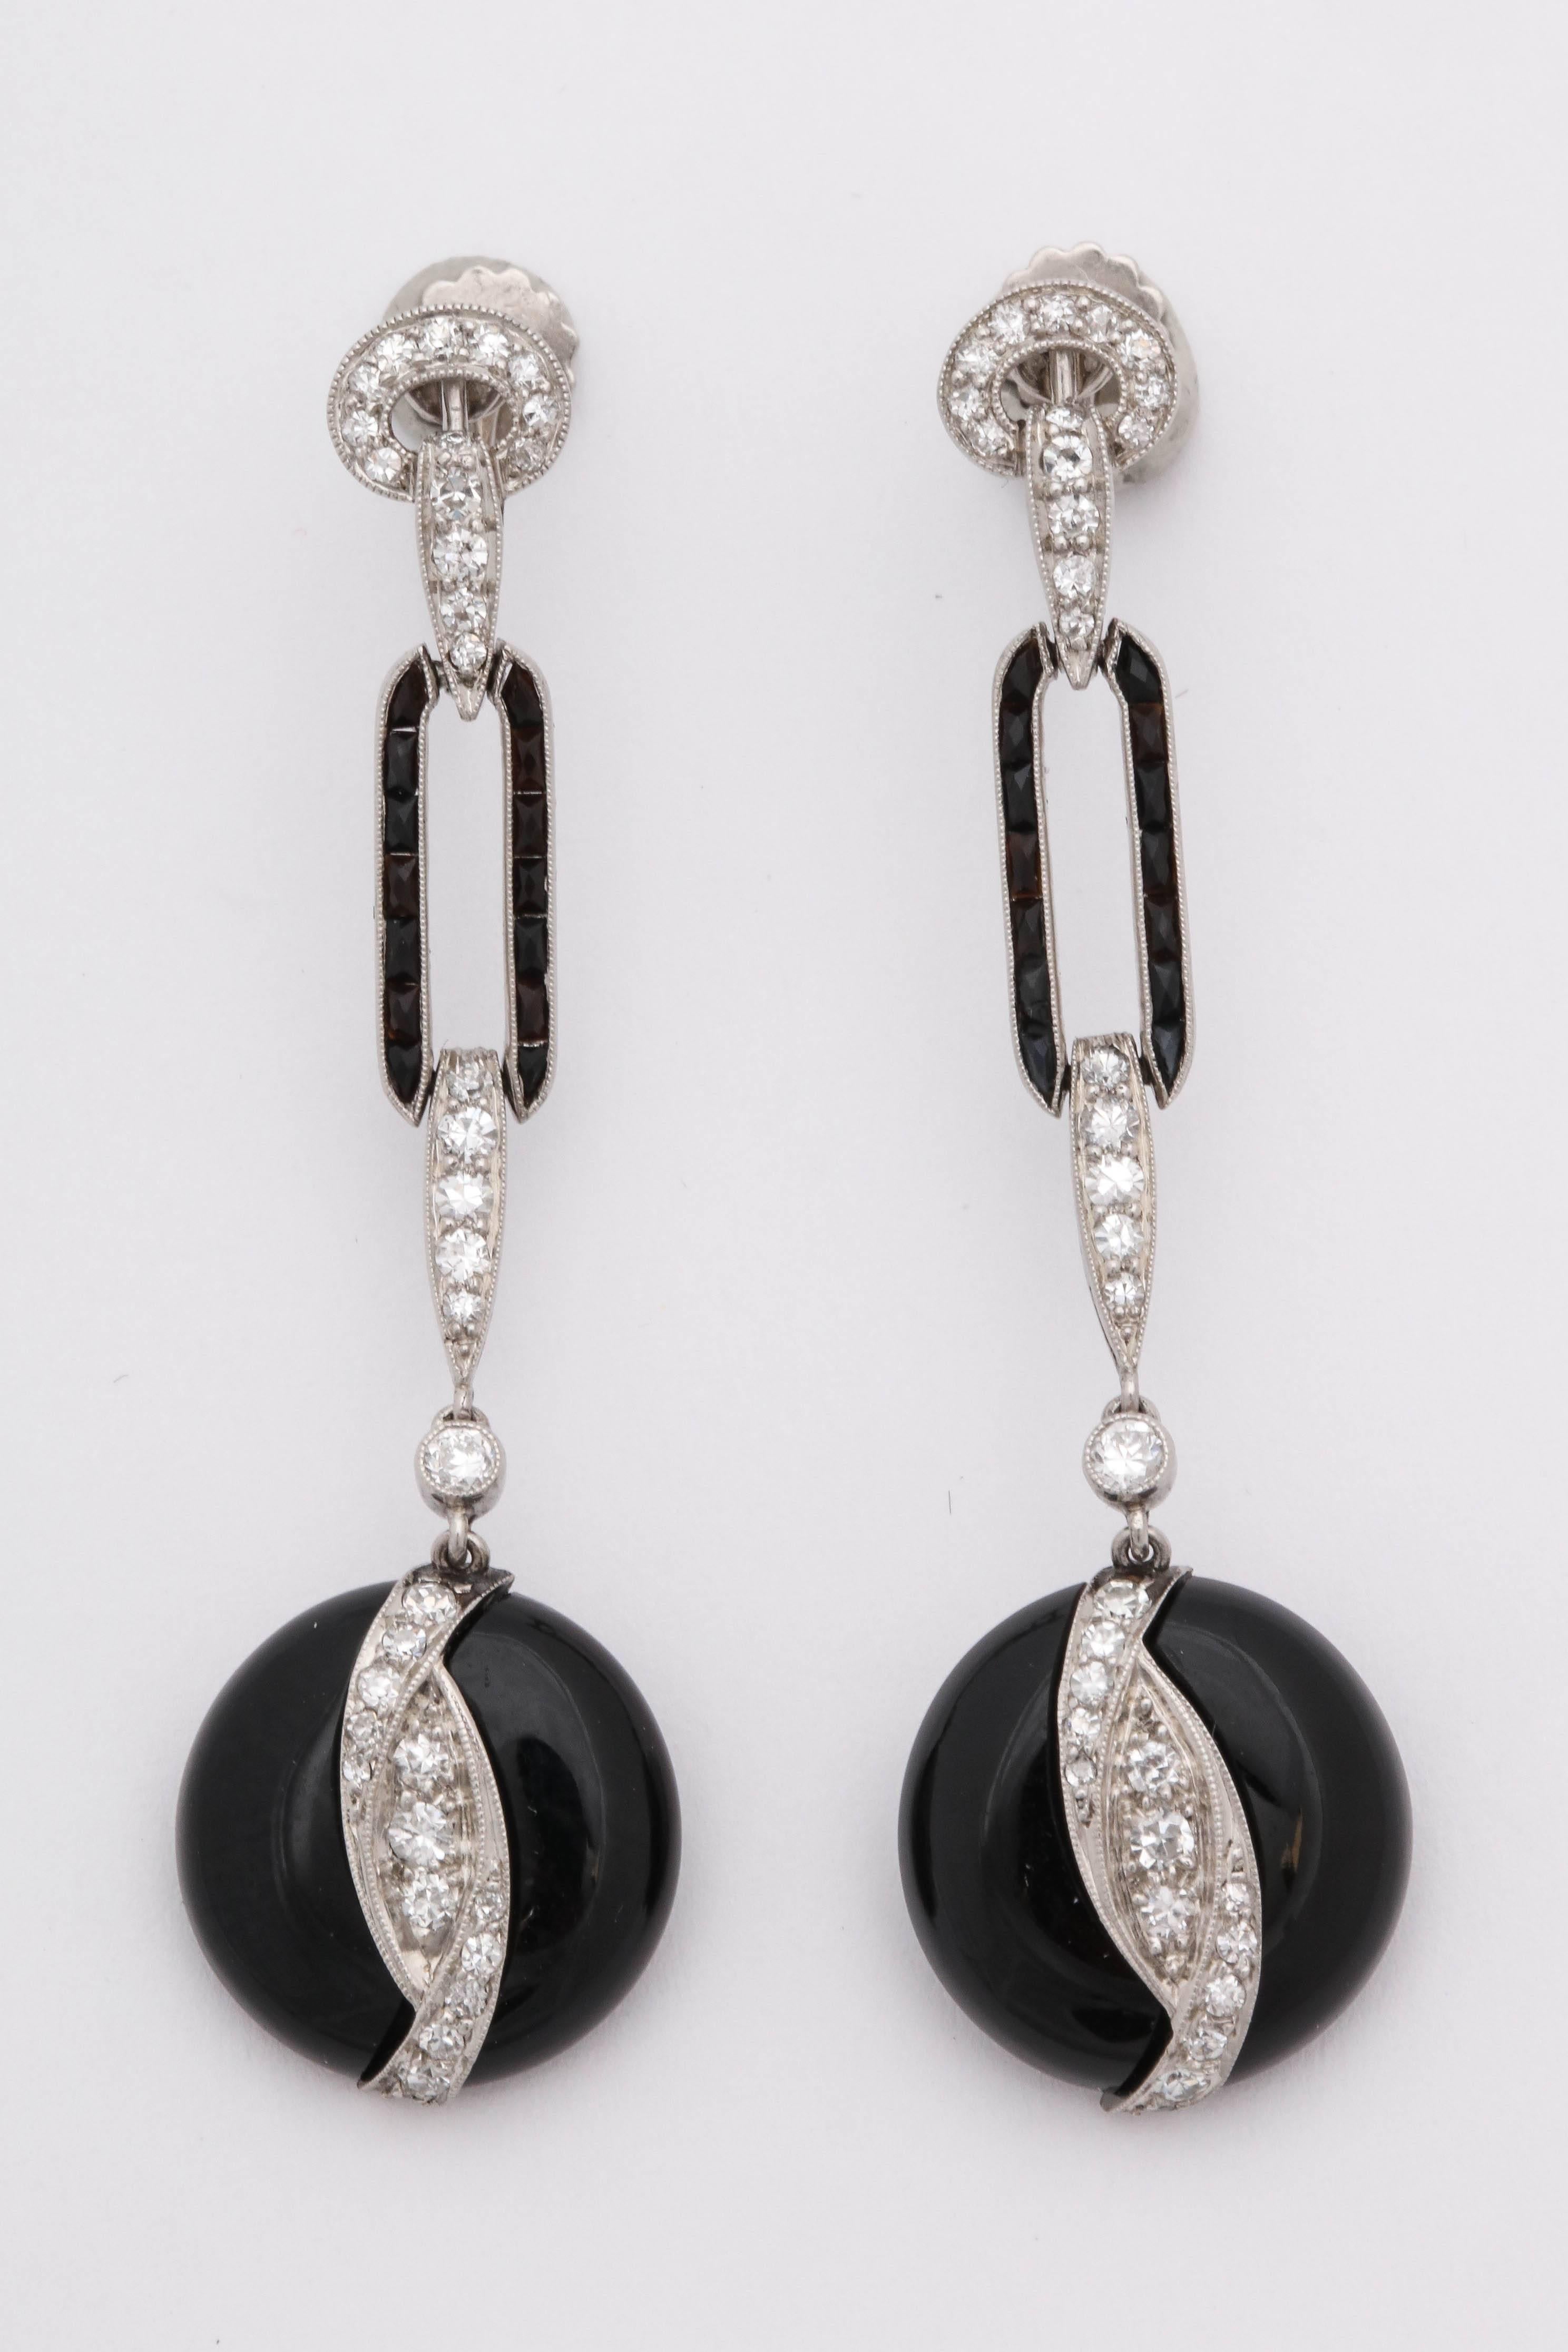 One Pair Of Platinum Screwback Earrings Designed With Numerous French Cut Onyxes In An Open Loop Setting And Further Embellished With Numerous Antique Cut Diamonds Weighing Approximately 2 Carats Total weight. A Custom Cut Circular Onyx Is Hanging